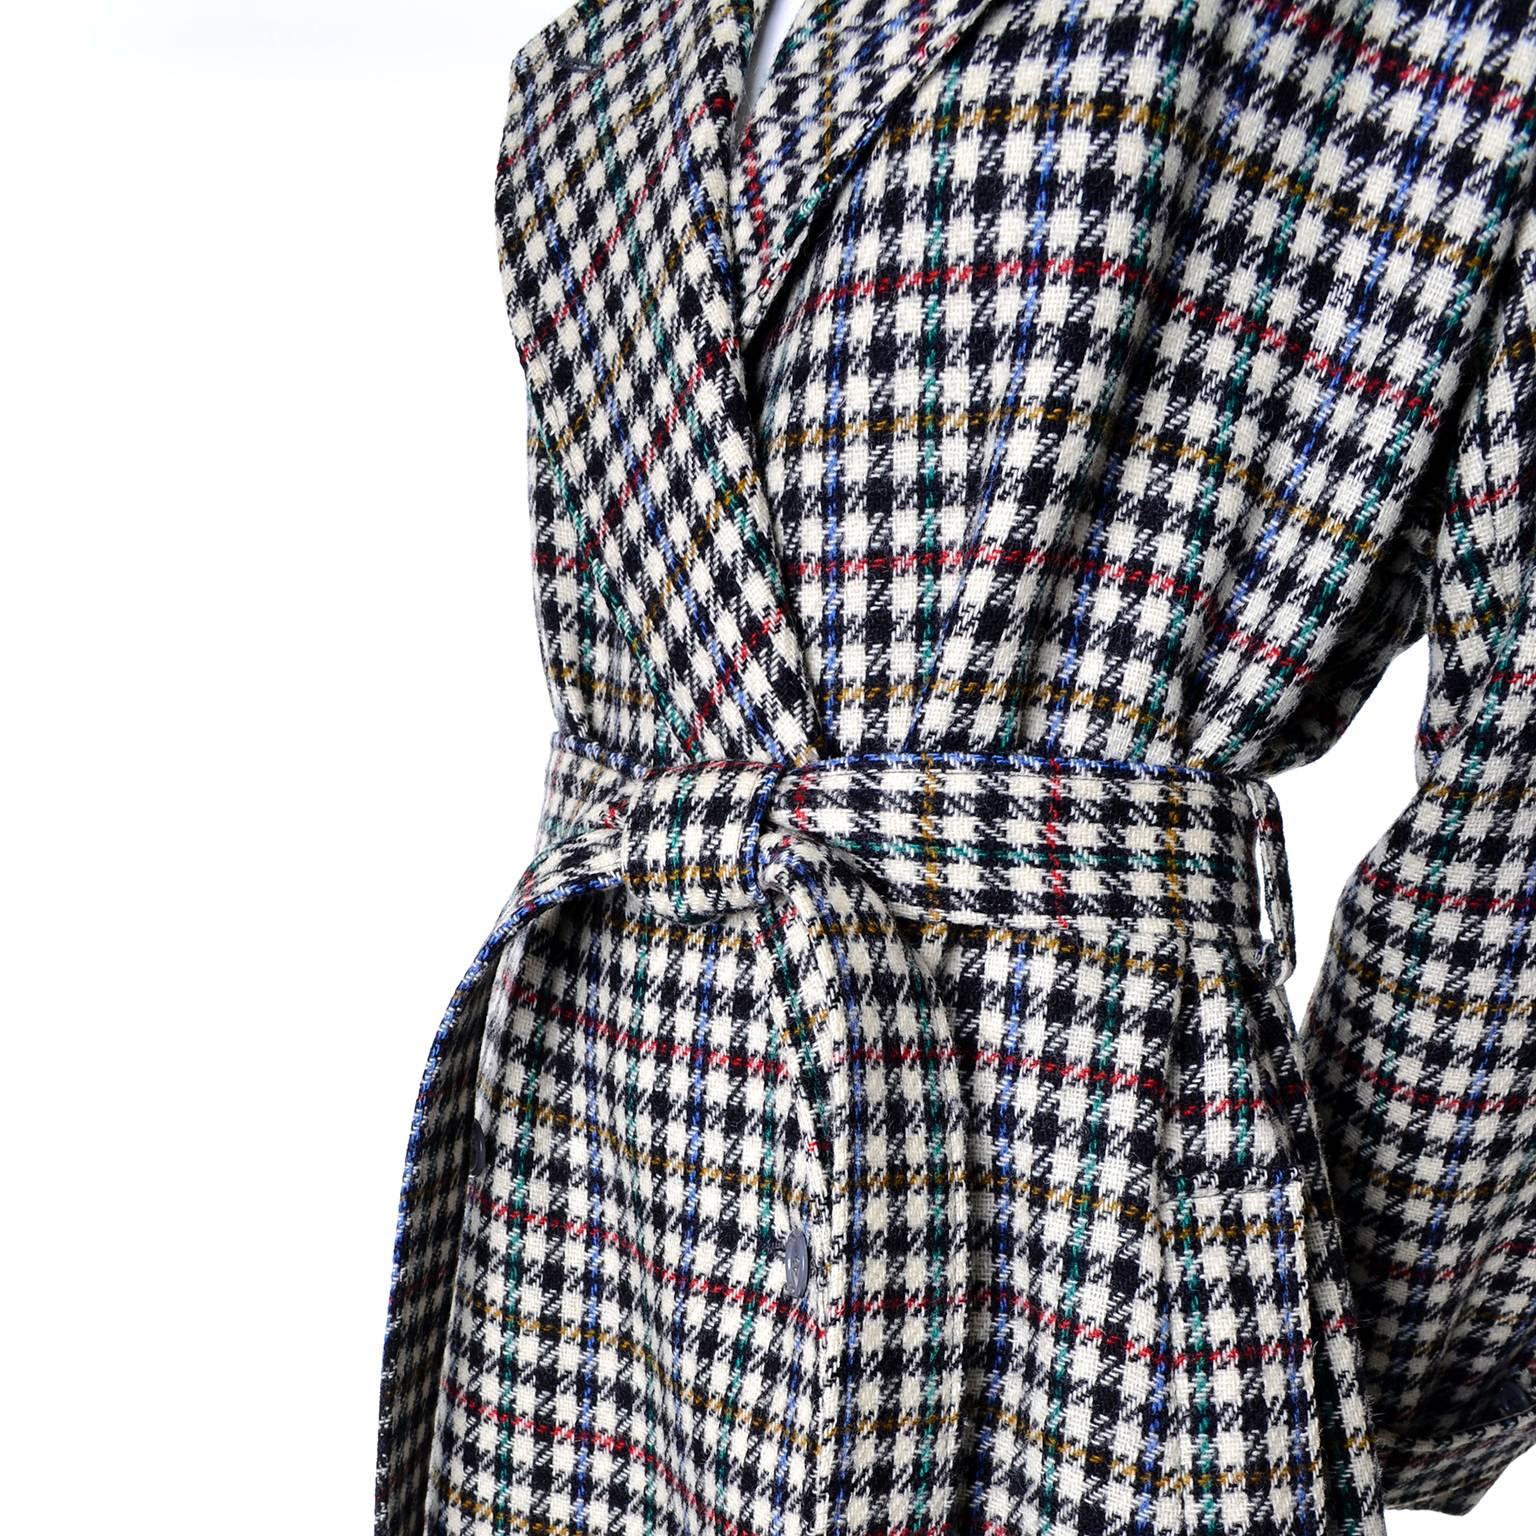 This fabulous vintage coat was designed by Kenzo in the 1980's.  The coat is 100% wool in a modern black, white, red, gold and green houndstooth plaid. The coat has pockets, a fabric belt, and is fully lined in a 70% wool 30% nylon blend. There are